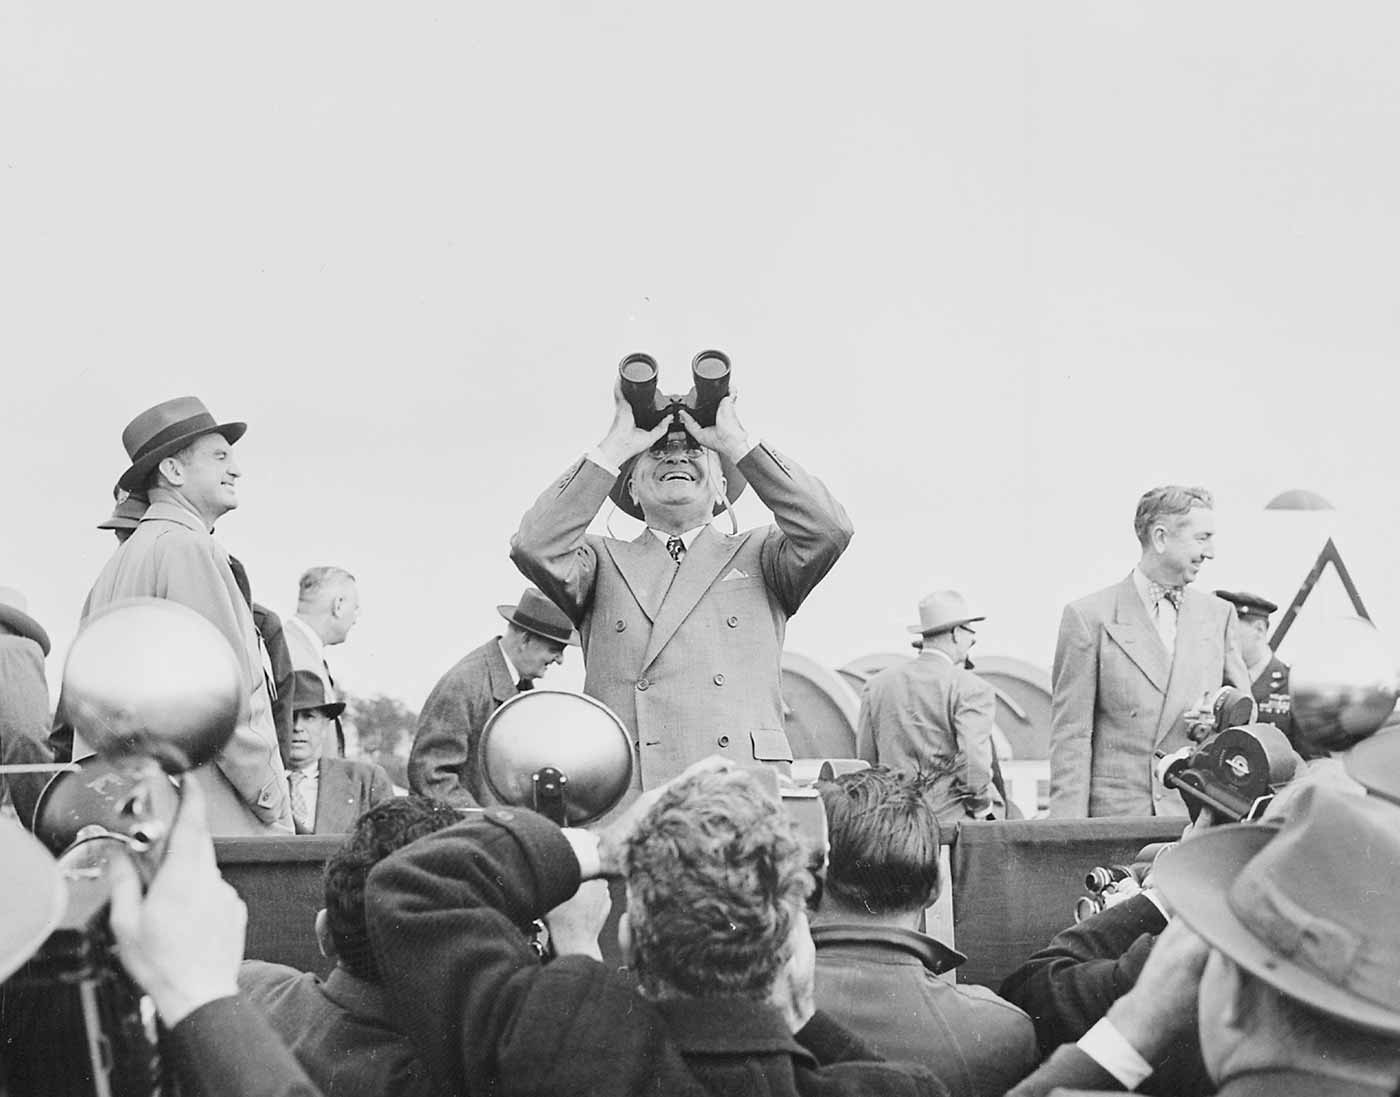 Photograph of President Truman using binoculars to observe an aerial display during an air show at Andrews Air Force